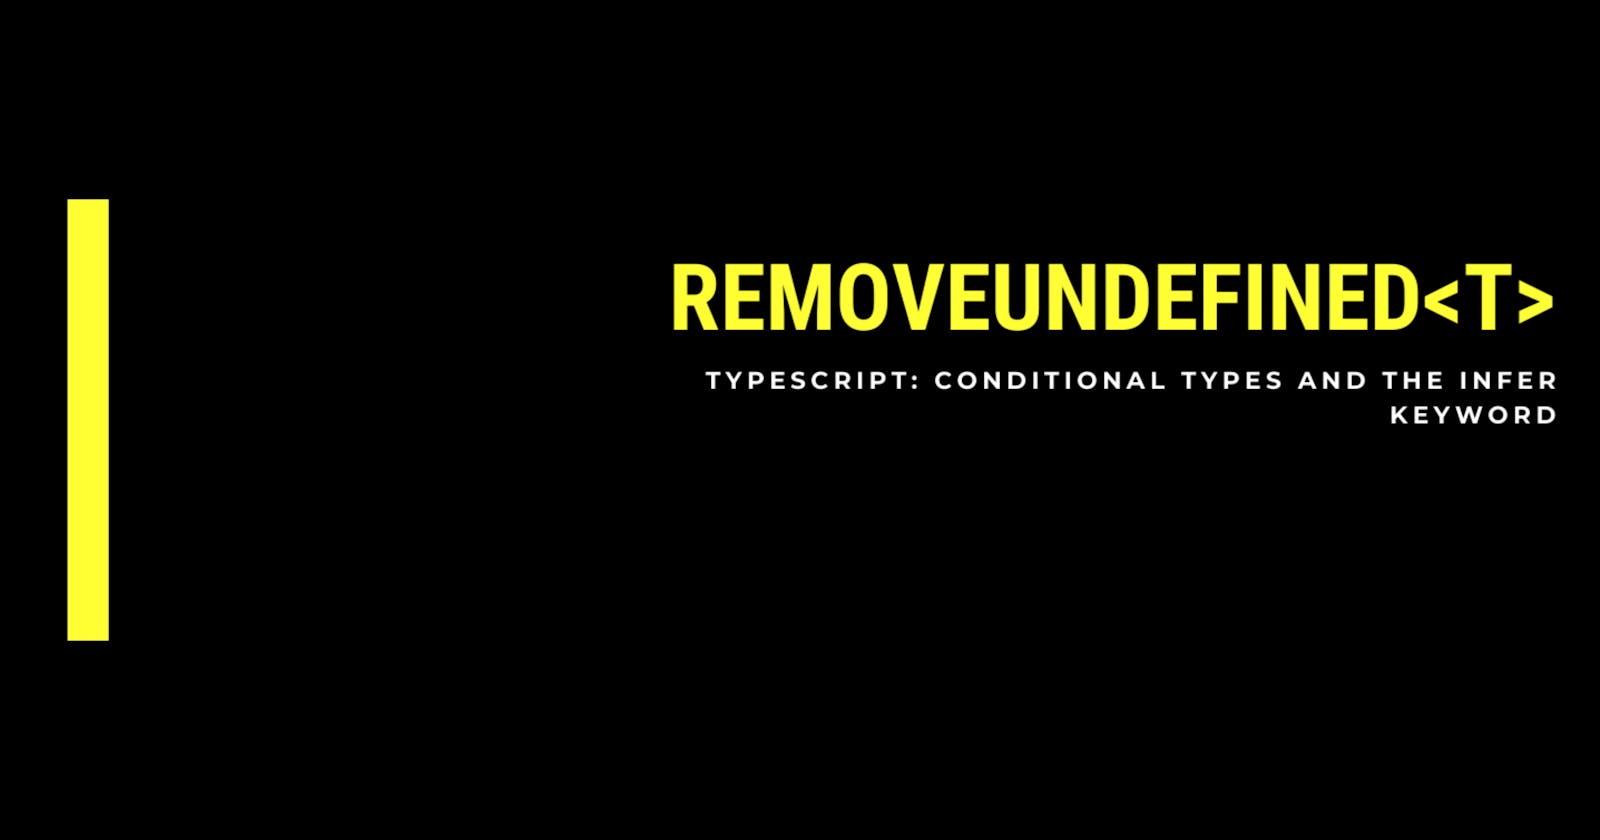 RemoveUndefined<T>,
TS: Conditional Types & The infer Keyword